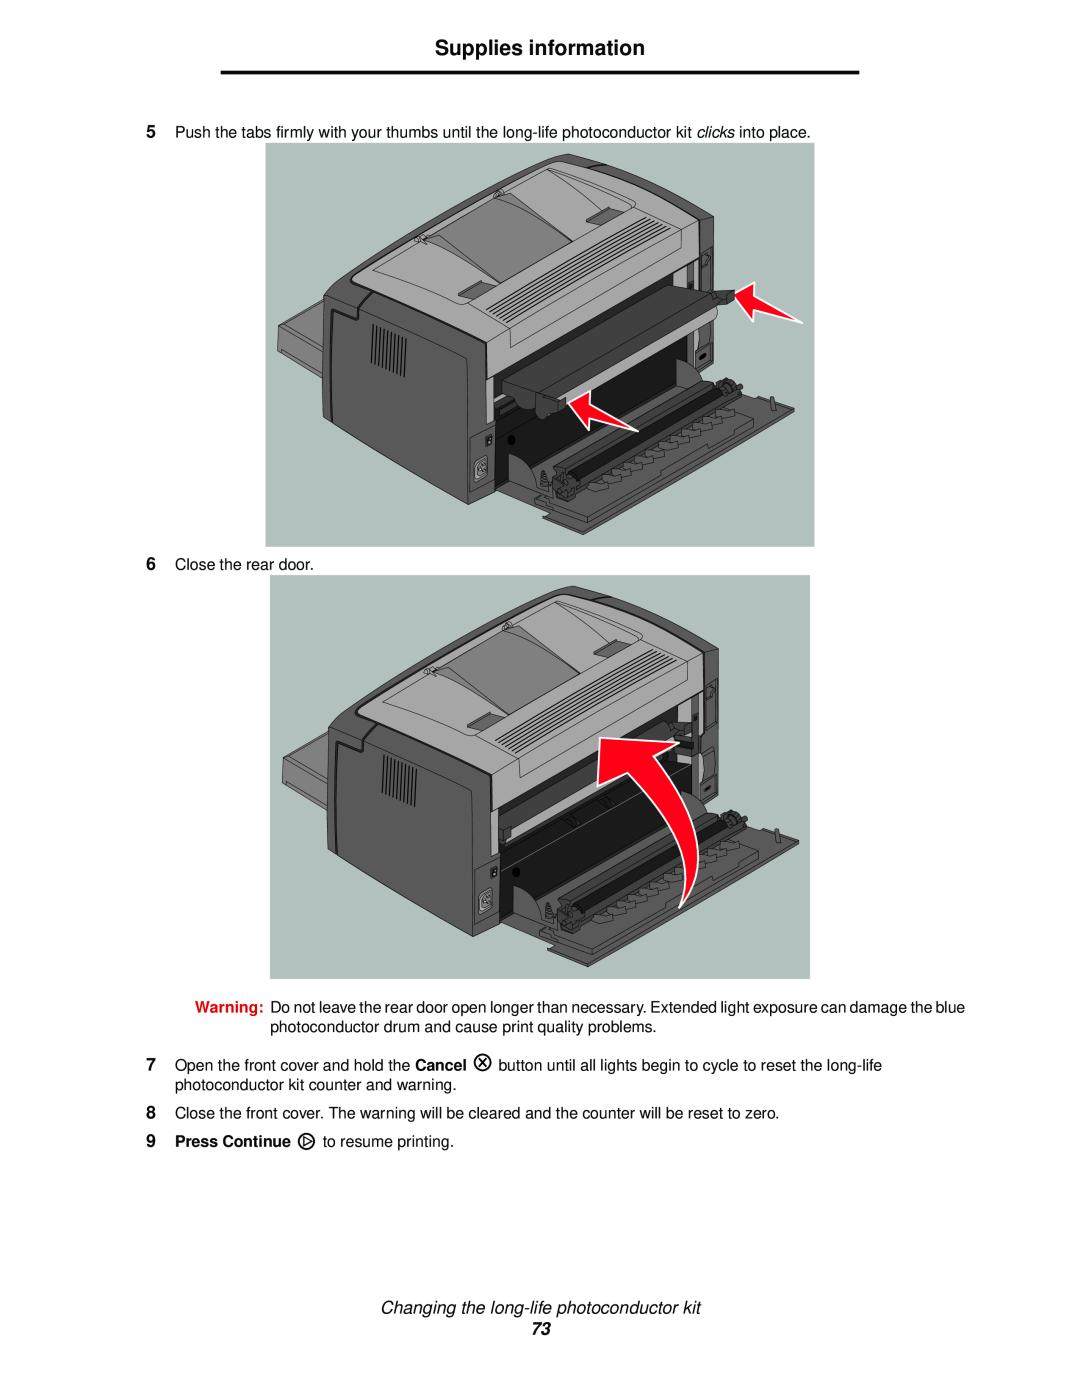 Lexmark 120 manual Supplies information, Changing the long-life photoconductor kit, Close the rear door 